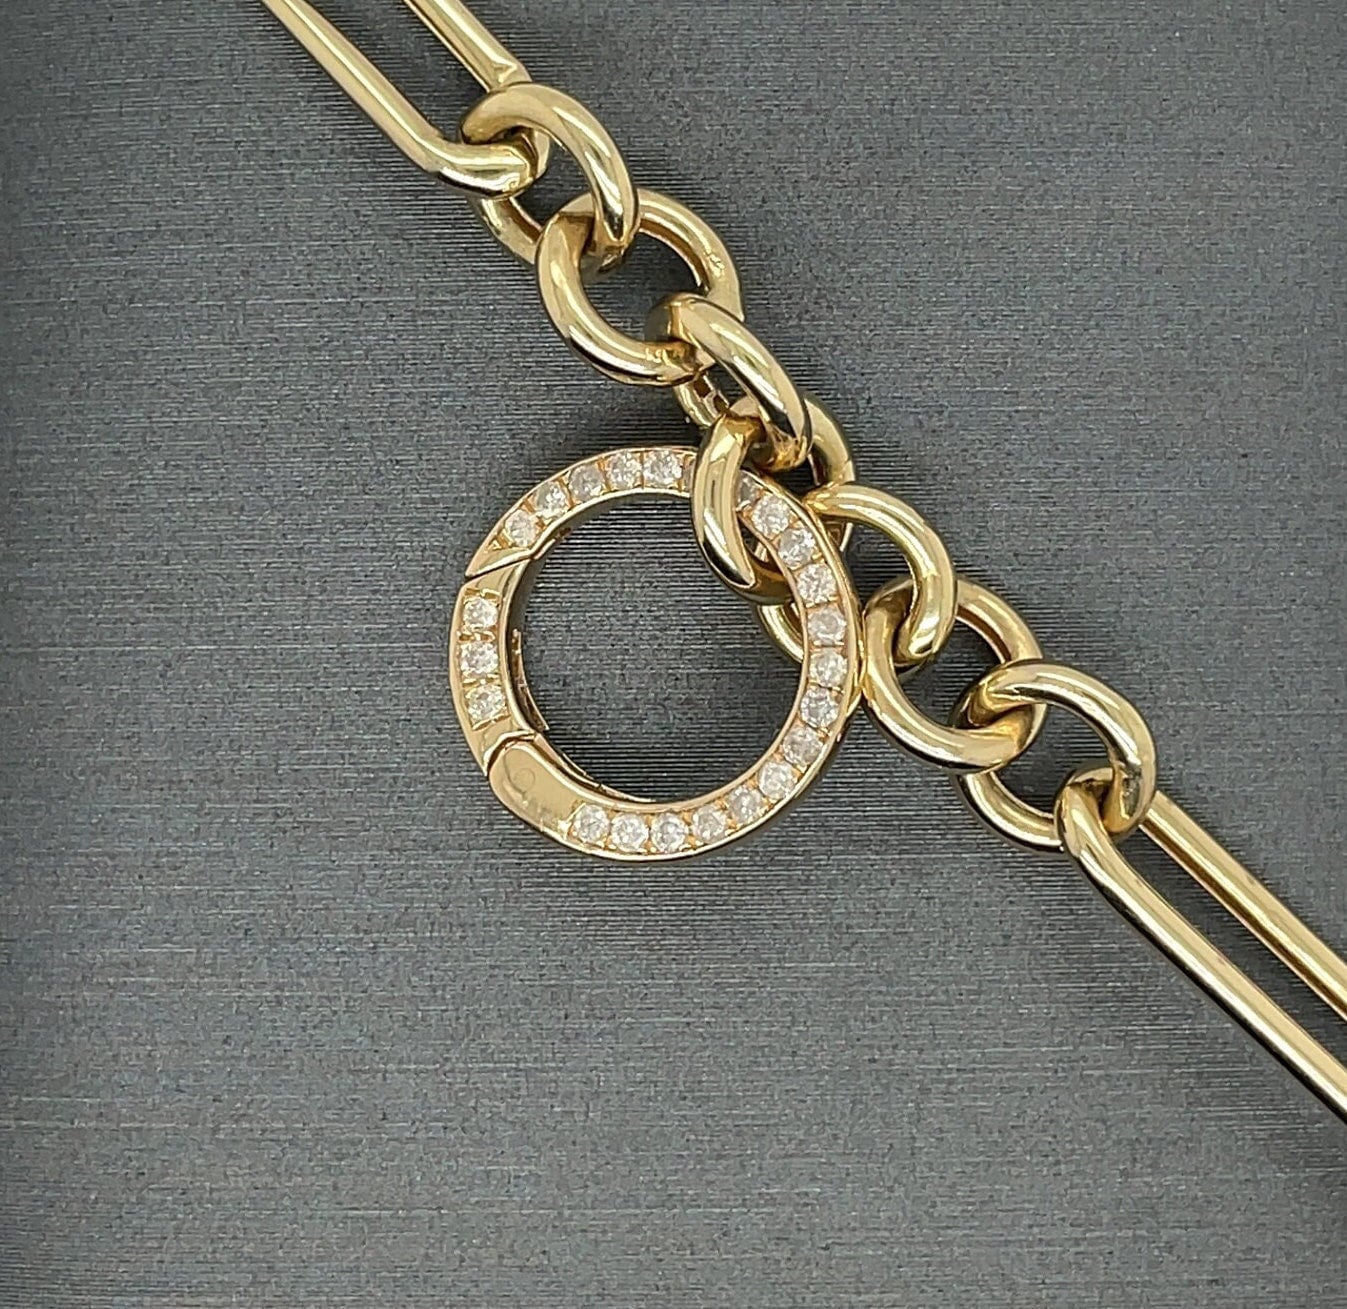 10K, 14K Solid Gold Charm Bail Hinged, Push Clasp Bail Connector